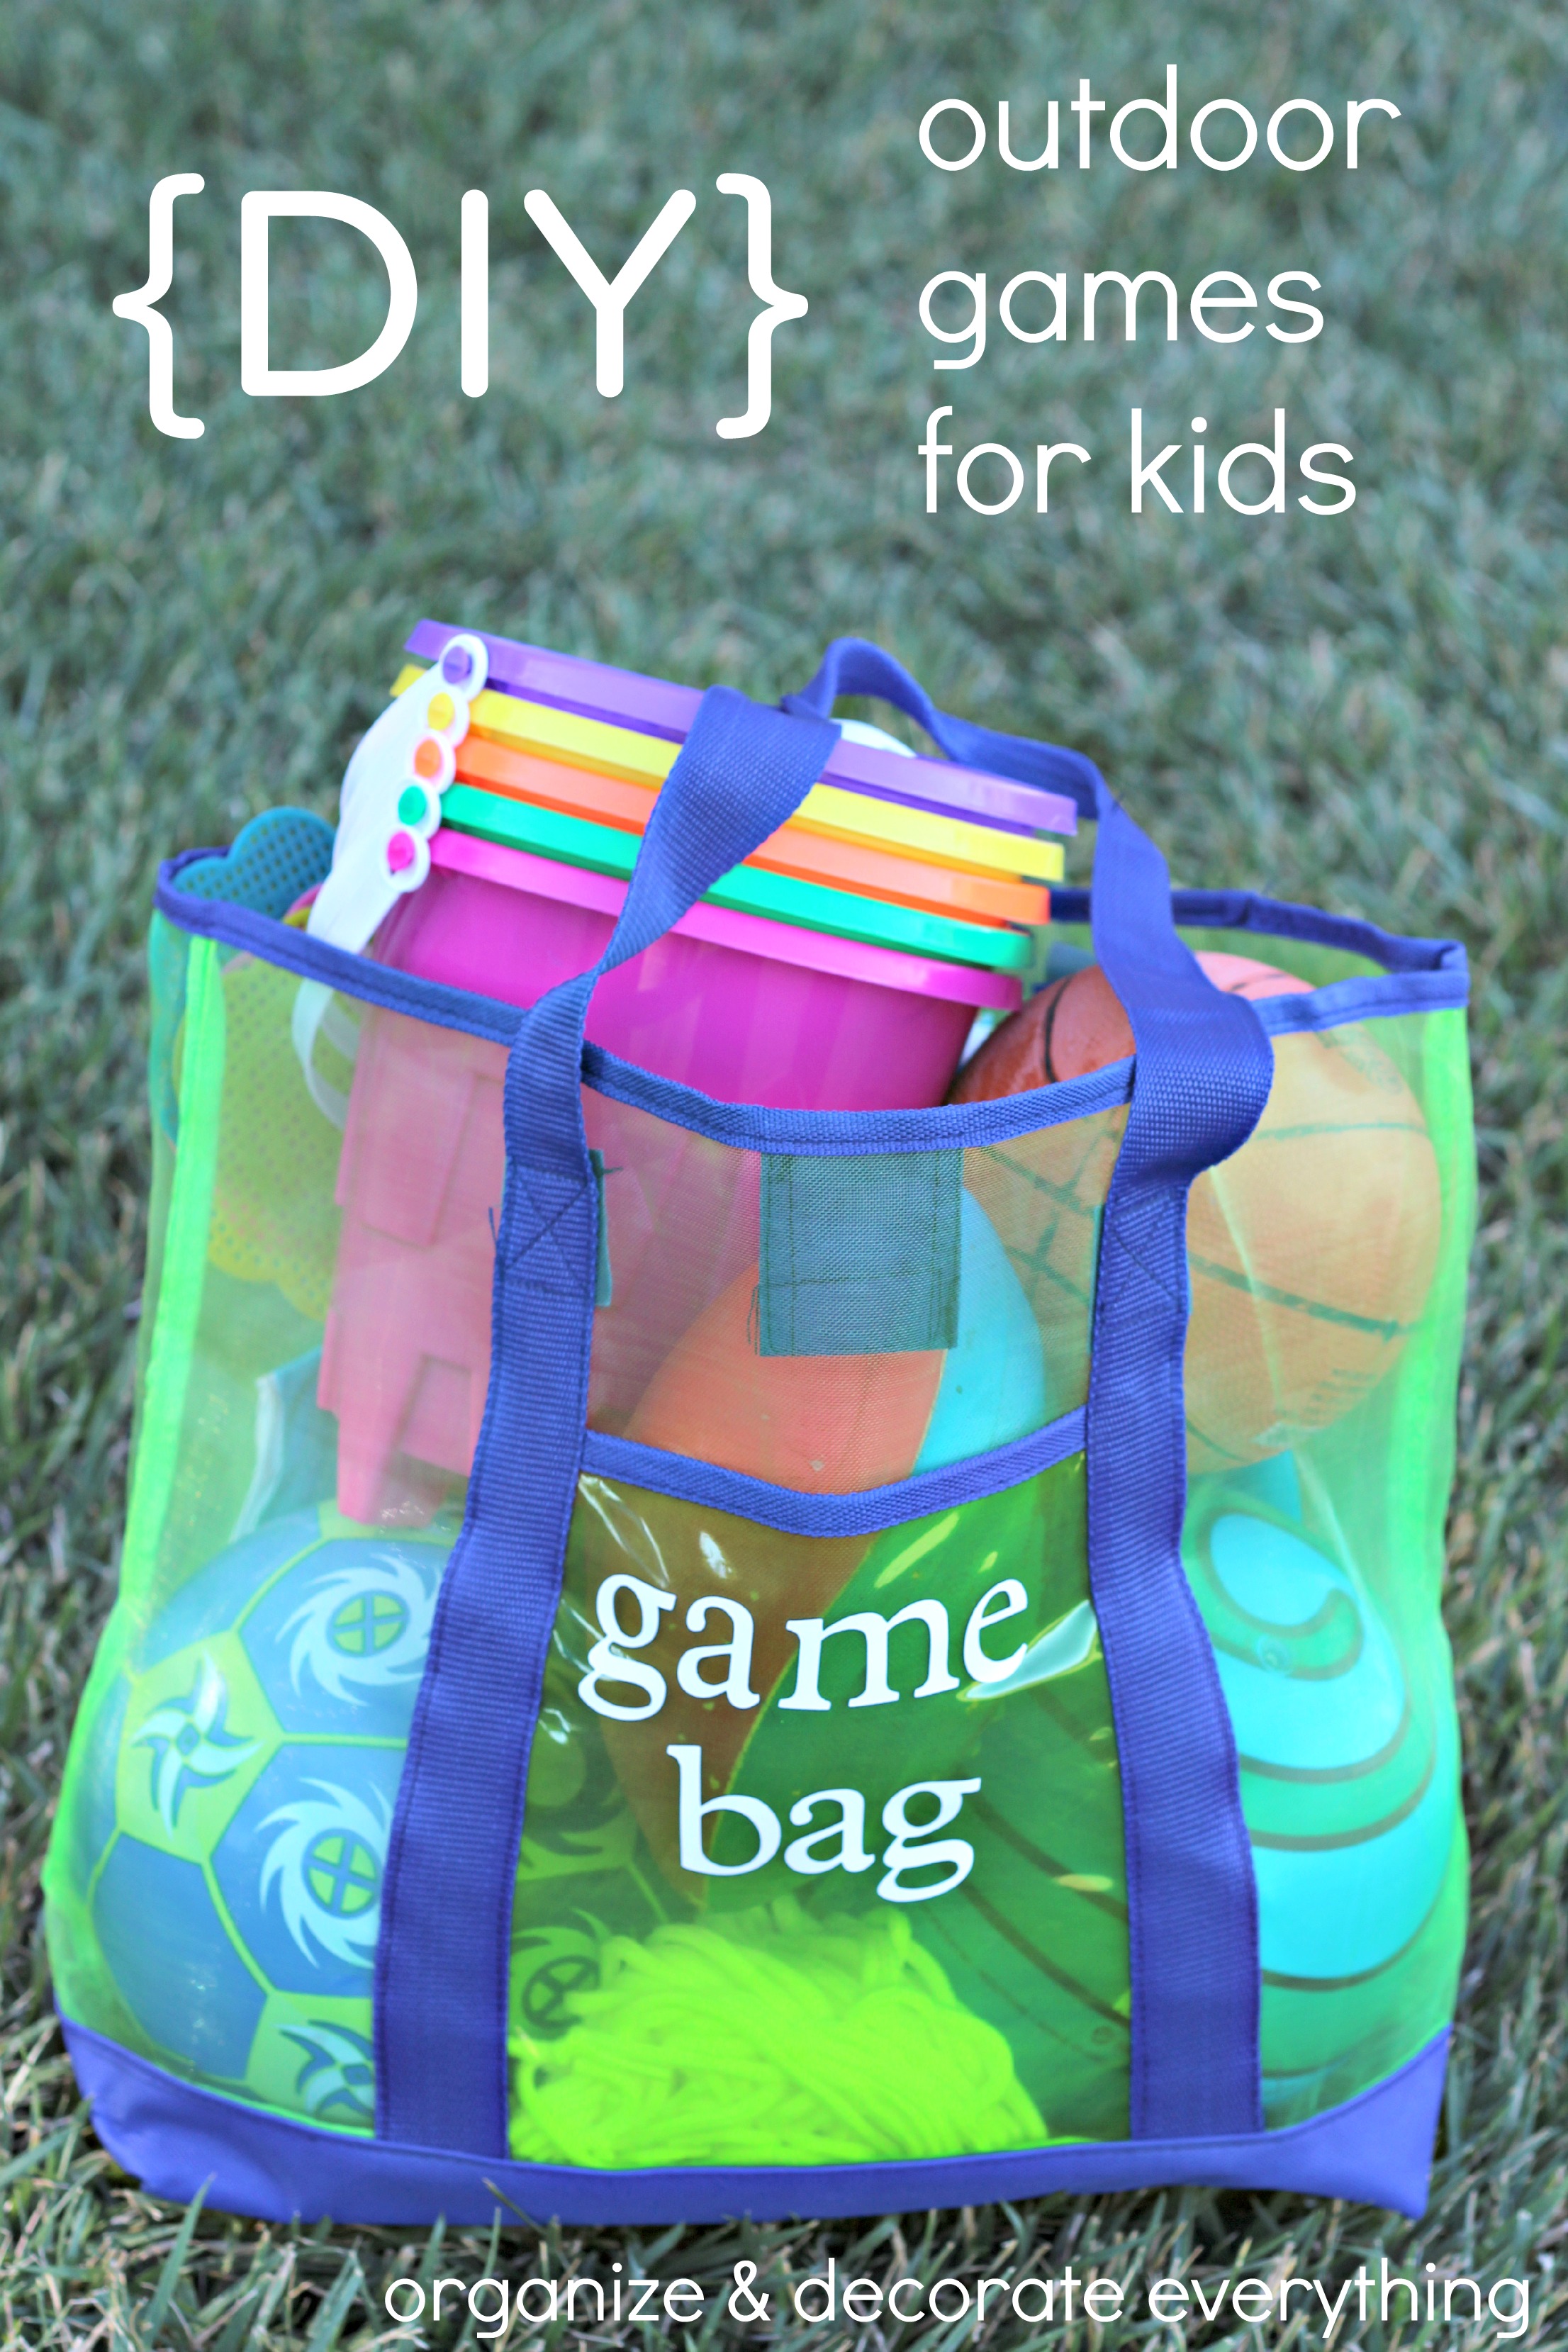 The Picnic Game: A Fun Family Guessing Game